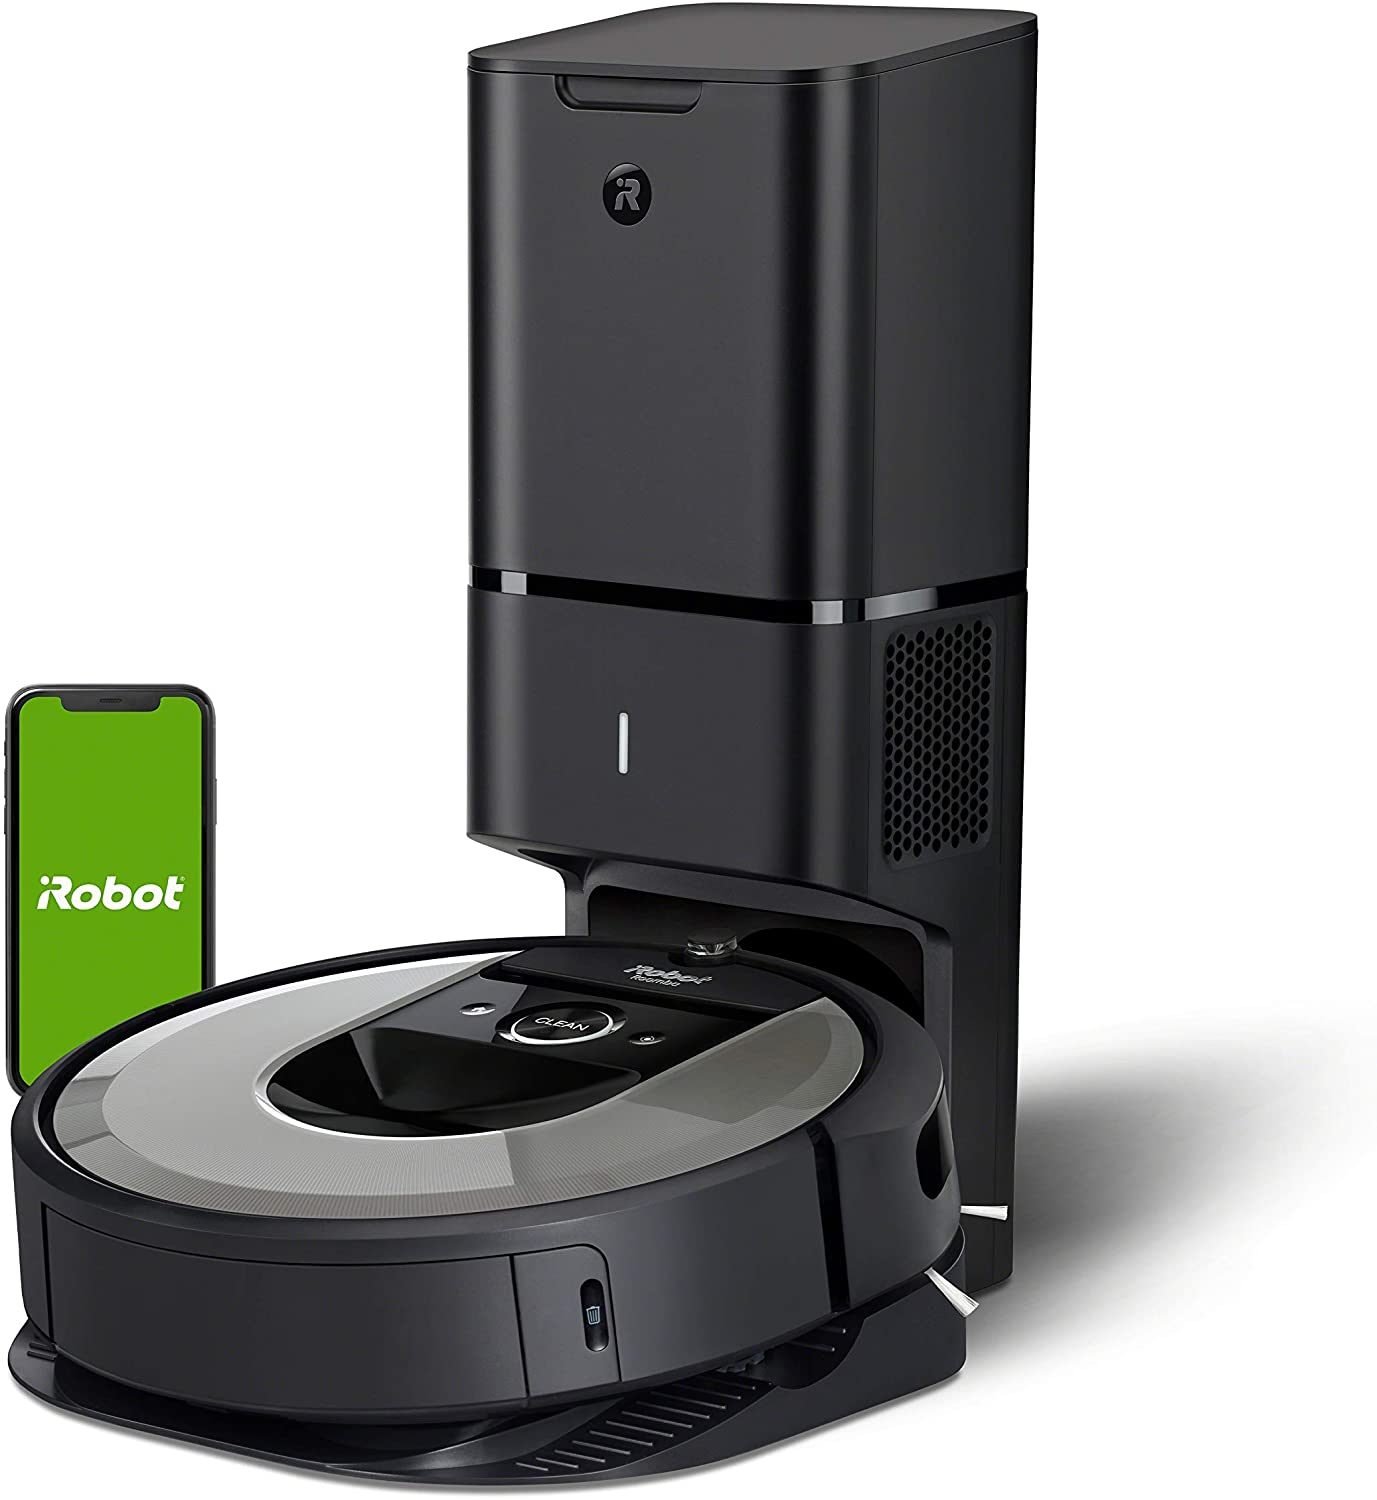 Are You Ready to Try a Roomba Vacuum? Now's the Time